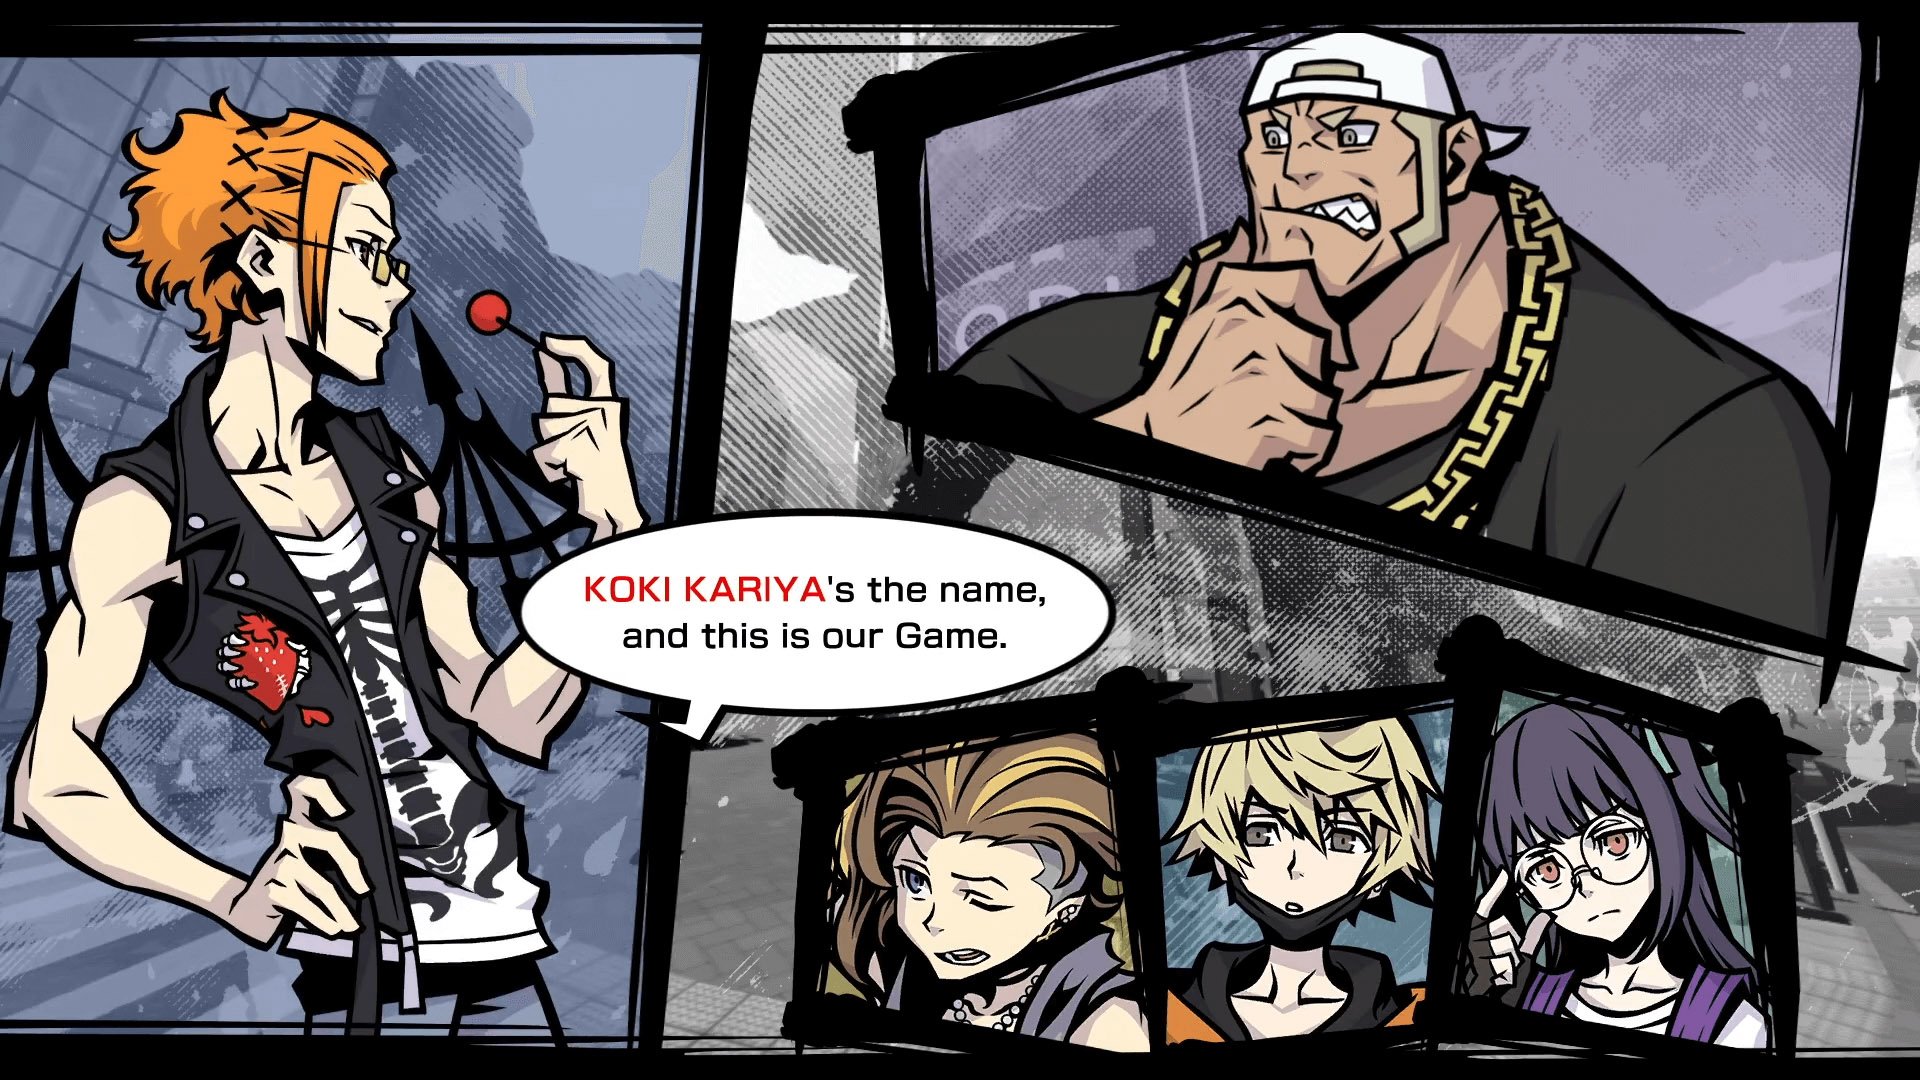 Review NEO The World Ends With You